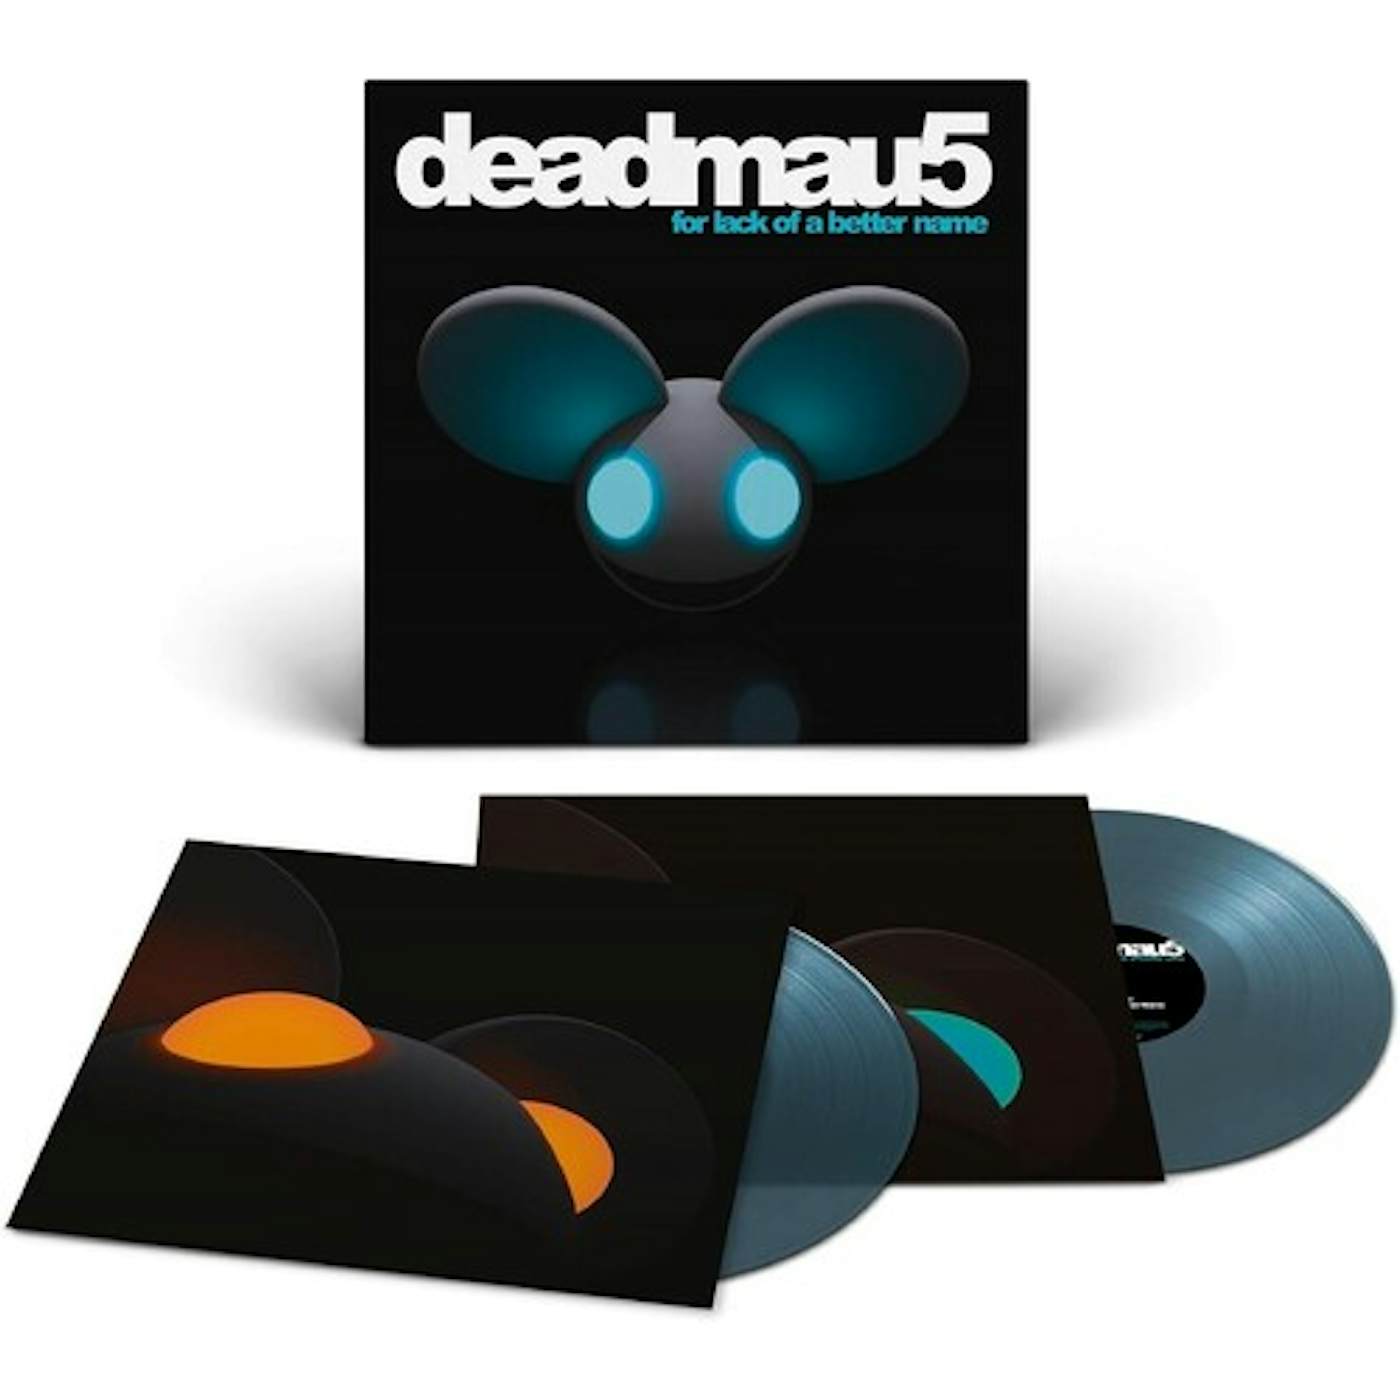 deadmau5 FOR LACK OF A BETTER NAME Vinyl Record